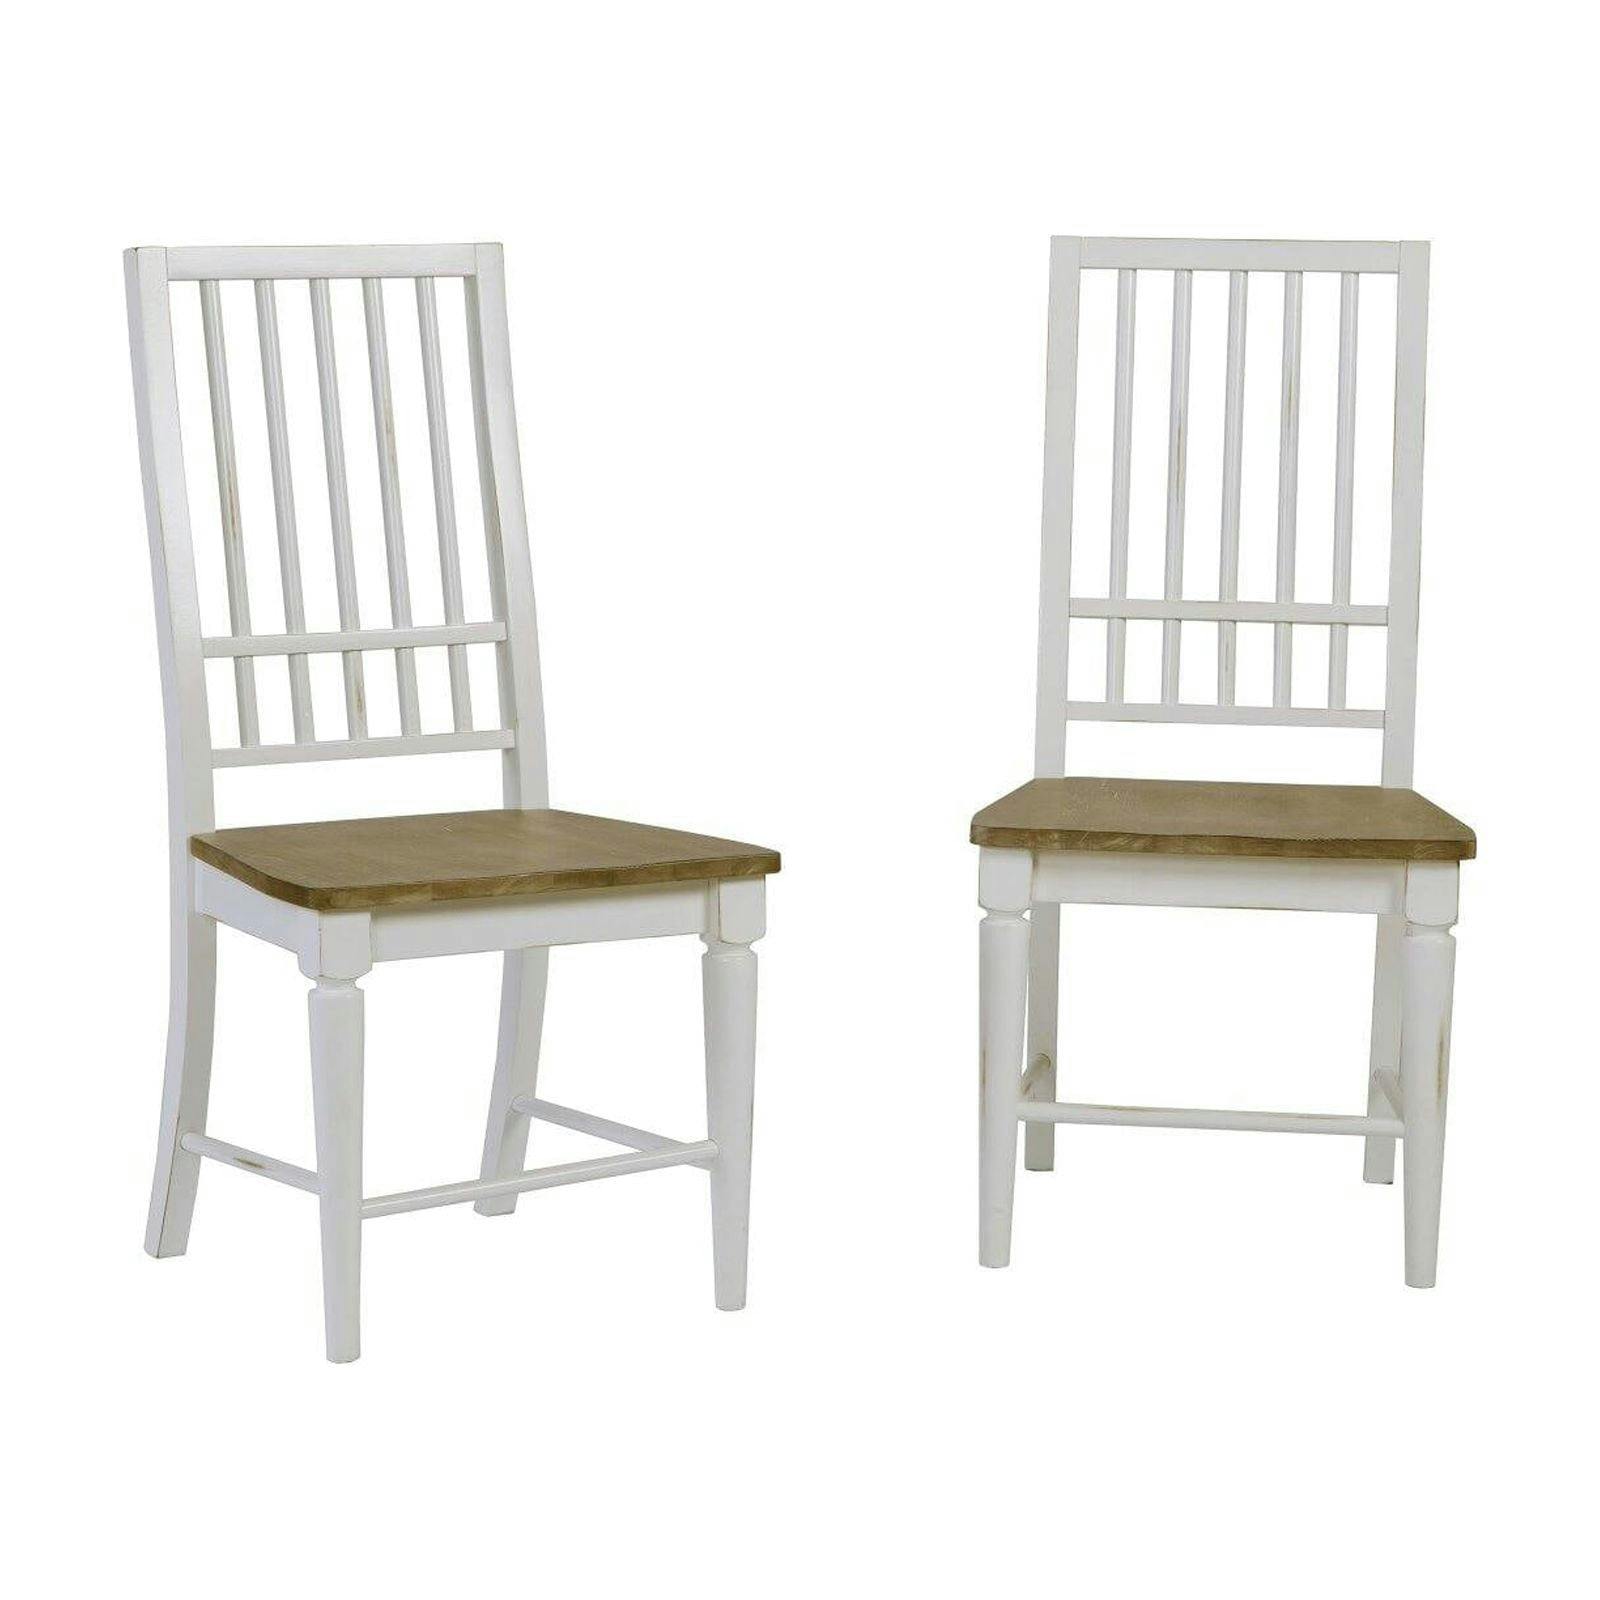 Rustic Light Oak & Distressed White Wooden Slat Dining Side Chairs